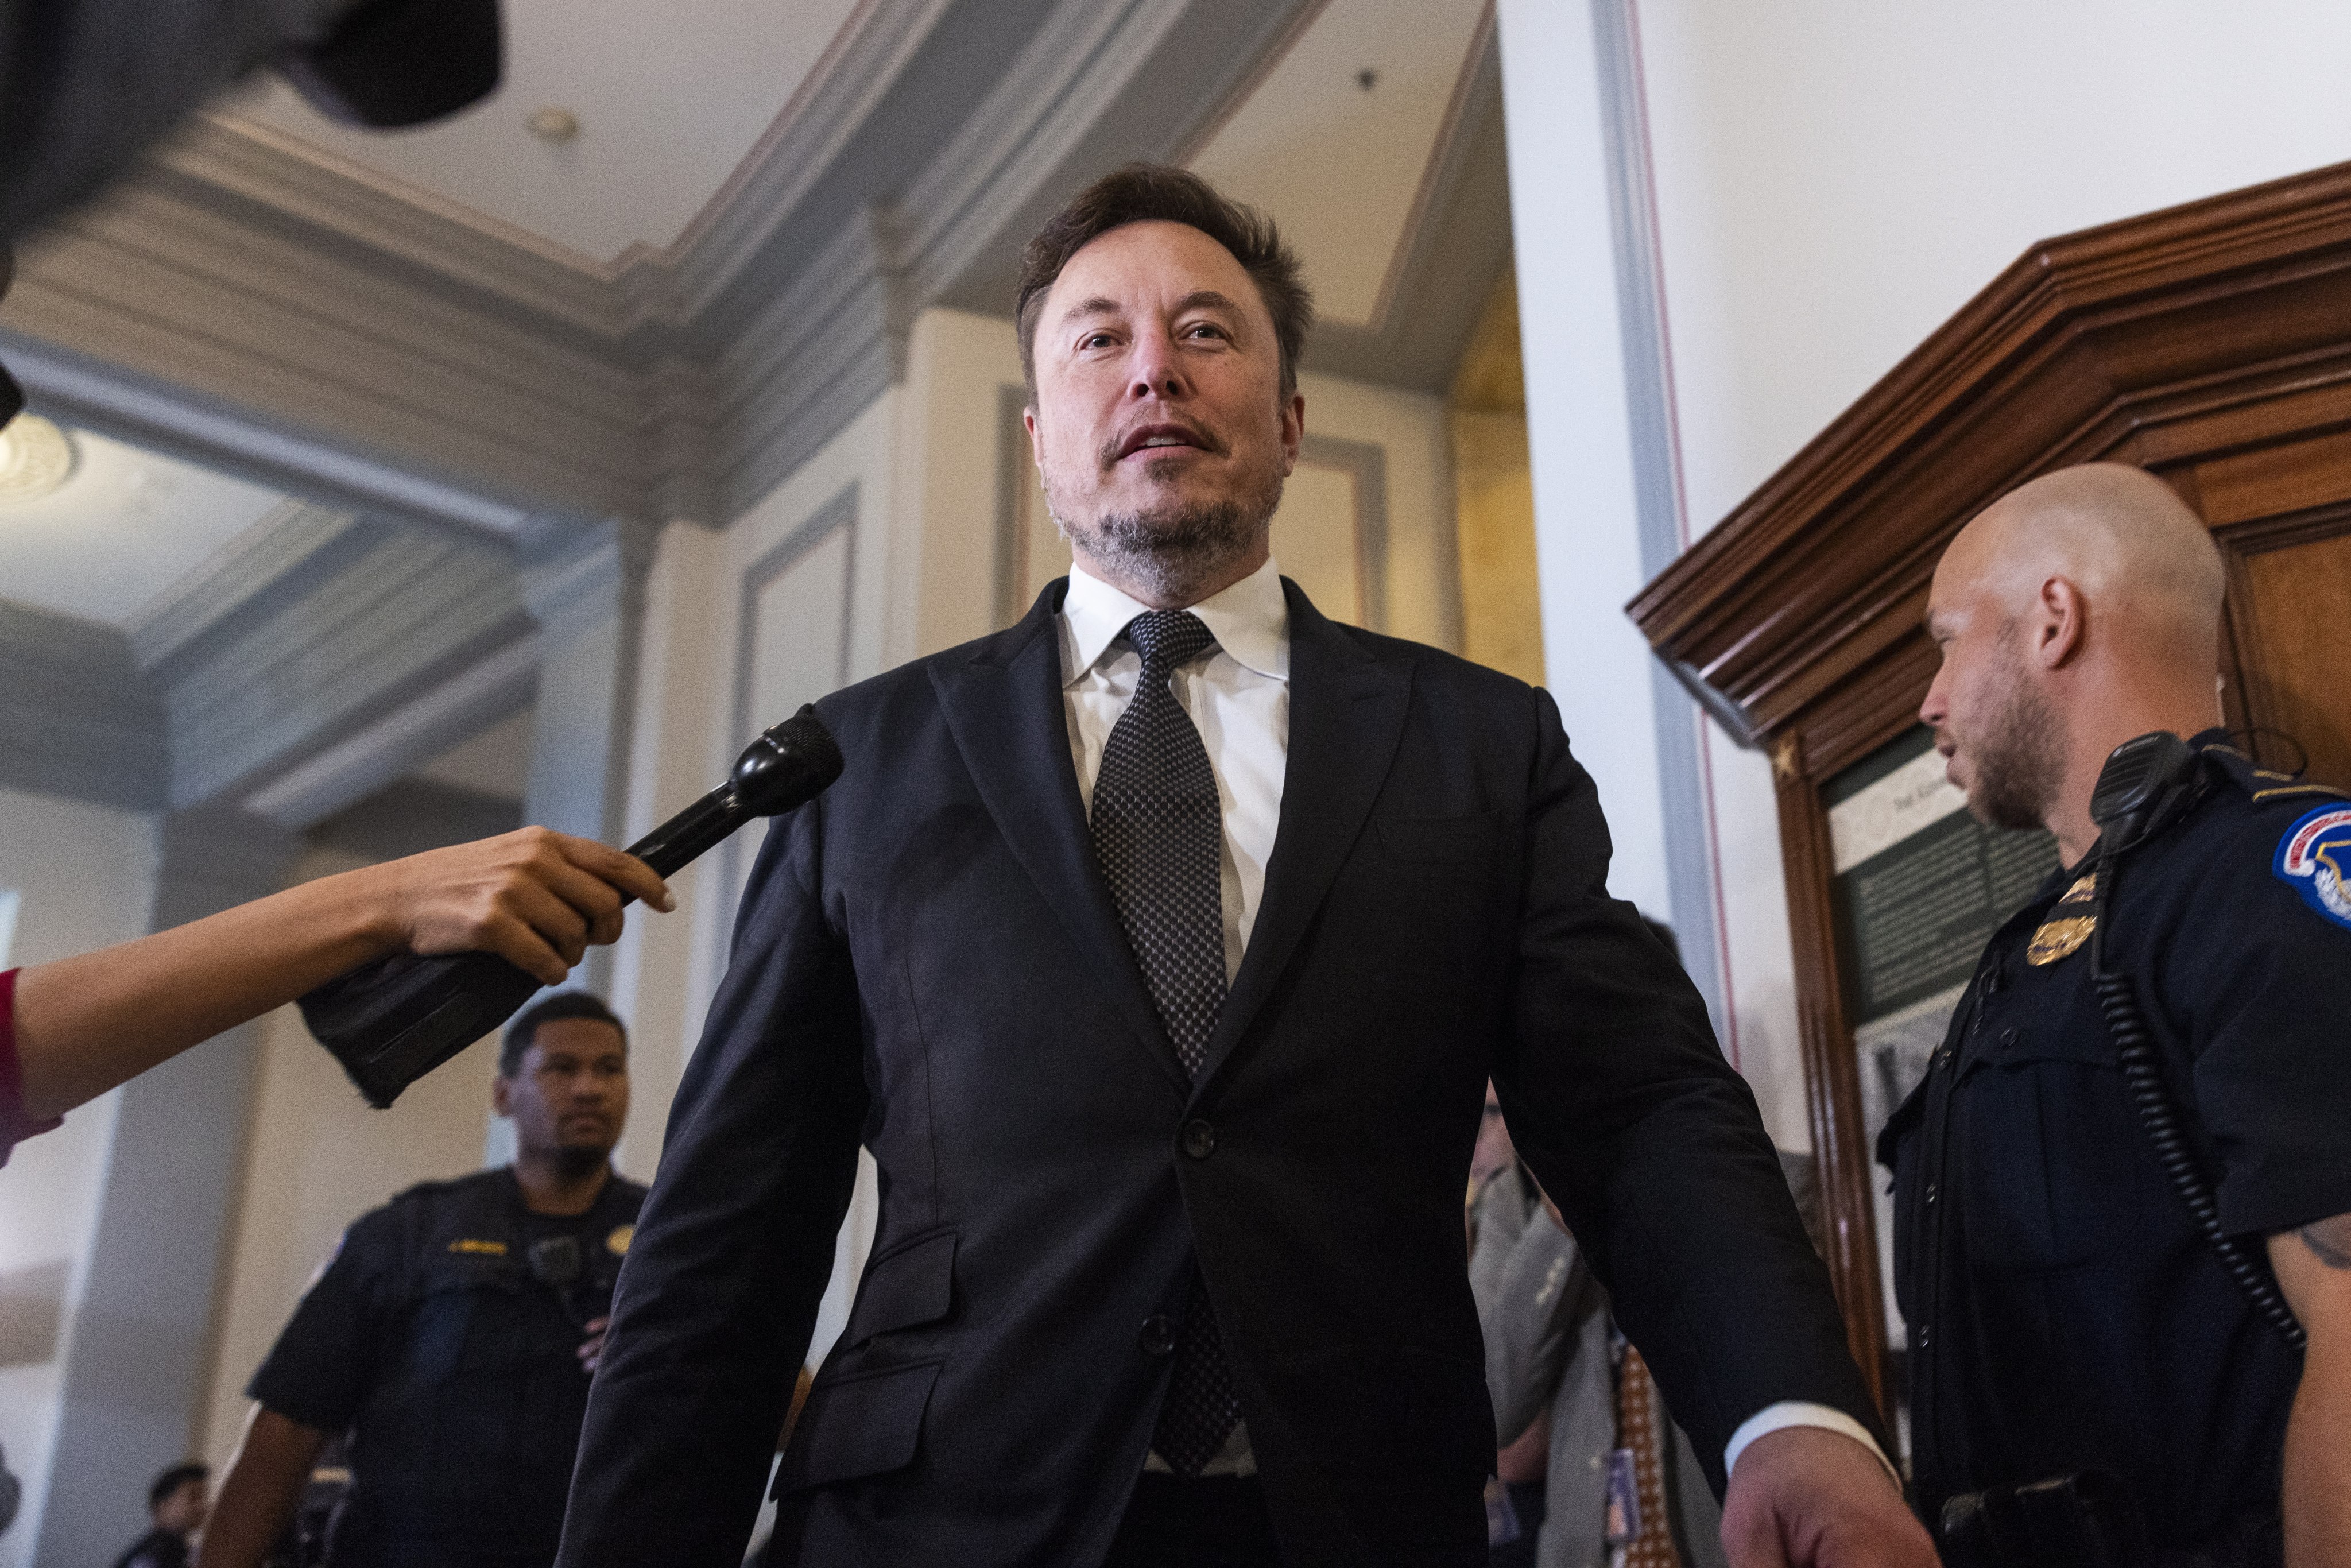 Elon Musk joins other tech leaders attending the US Senate bipartisan Artificial Intelligence Insight Forum on Capitol Hill on Wednesday. Photo: EPA-EFE